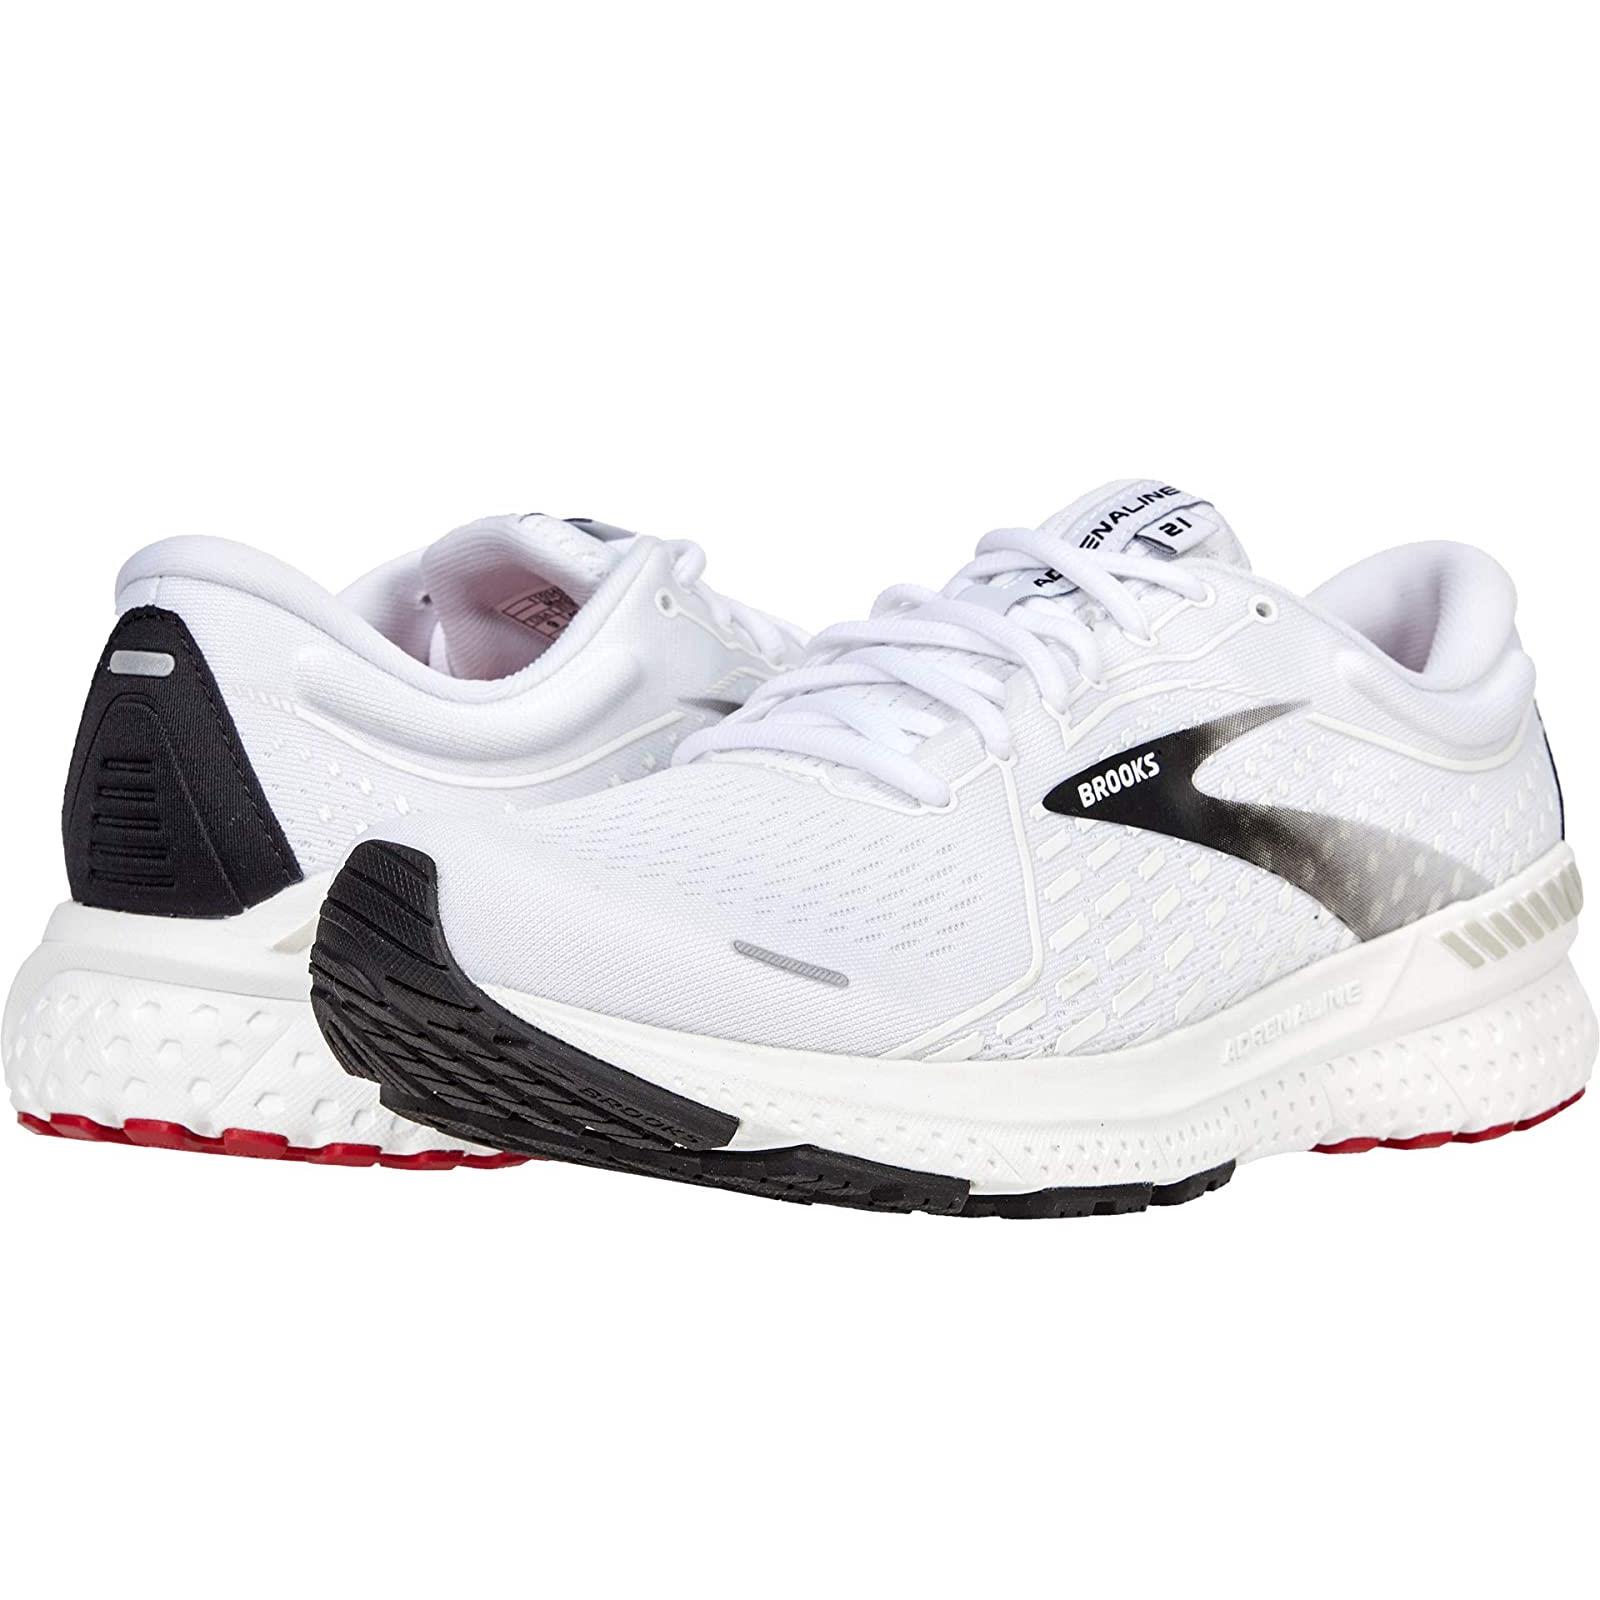 Man`s Sneakers Athletic Shoes Brooks Adrenaline Gts 21 White/Black/Red